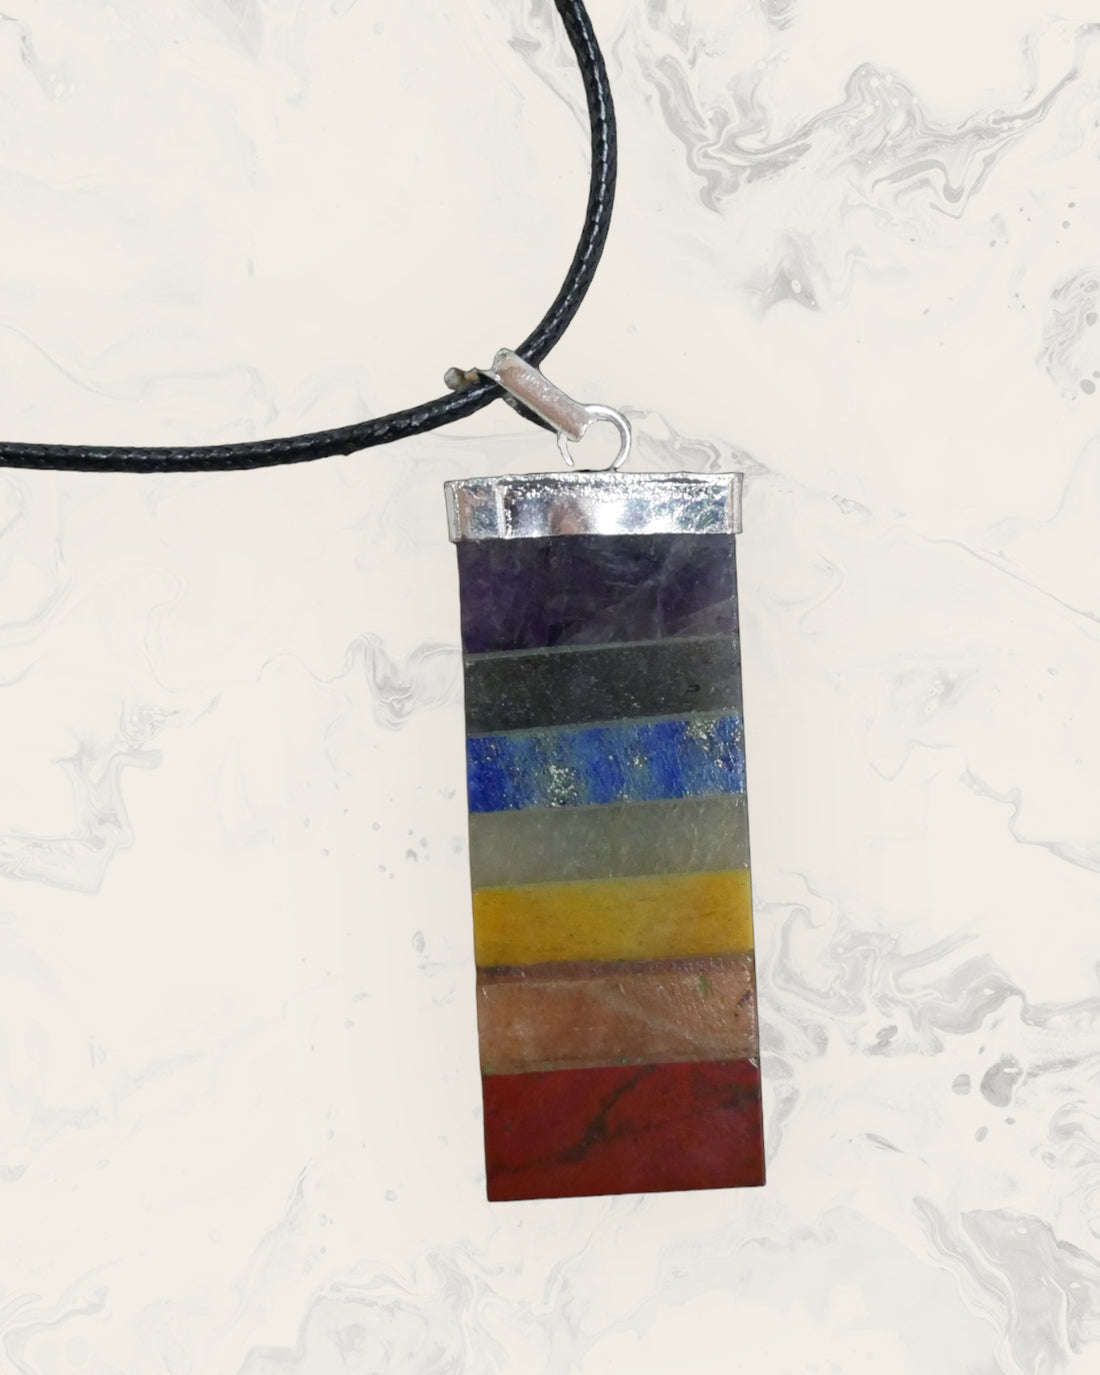 Chakra and Geode Necklace